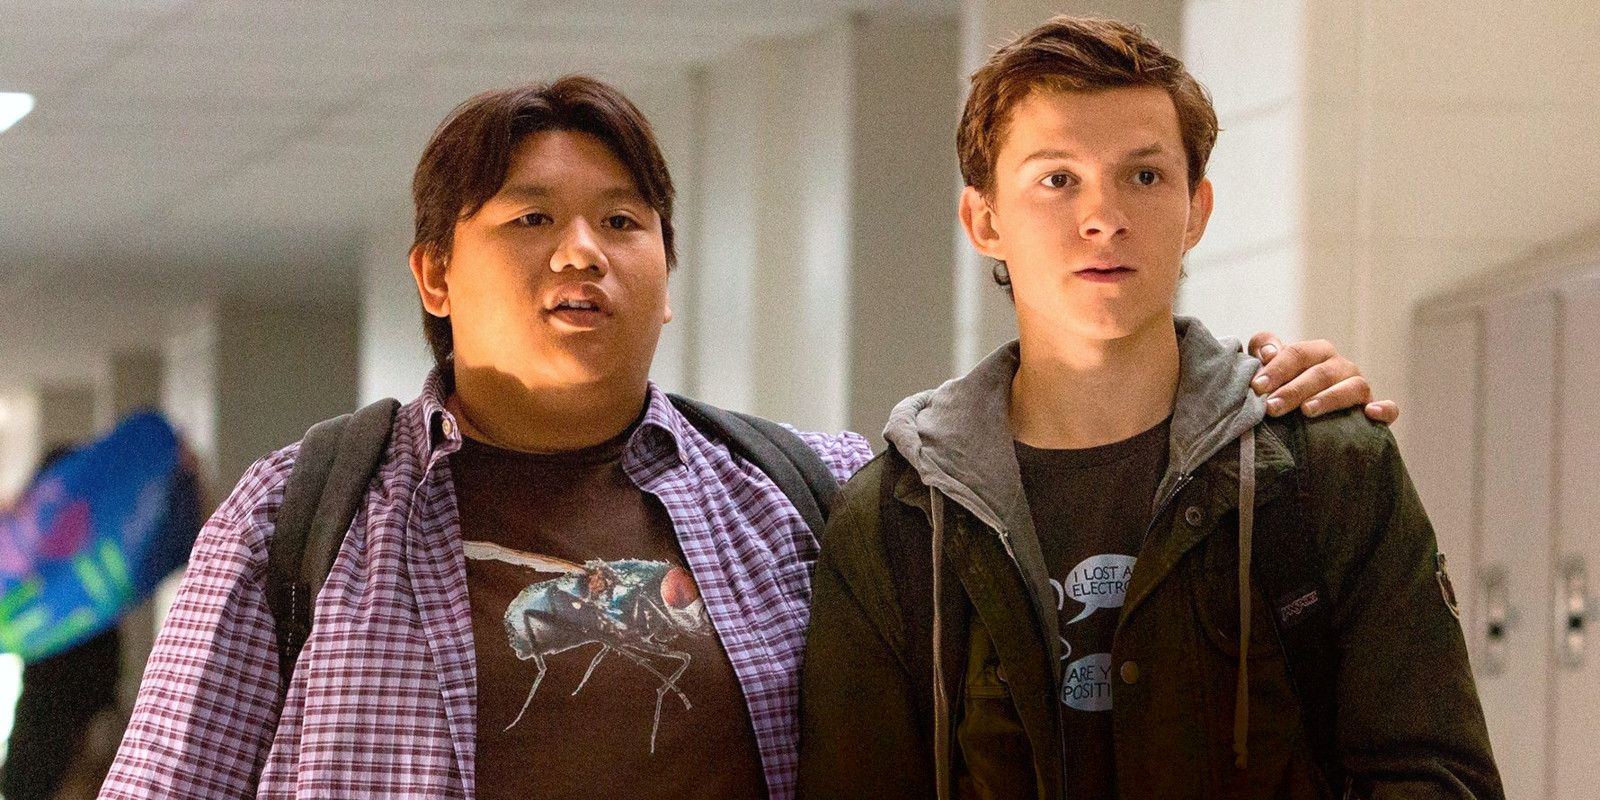 Jacob Batalon Recalls How Nervous He Was His First Time On SpiderMan Set